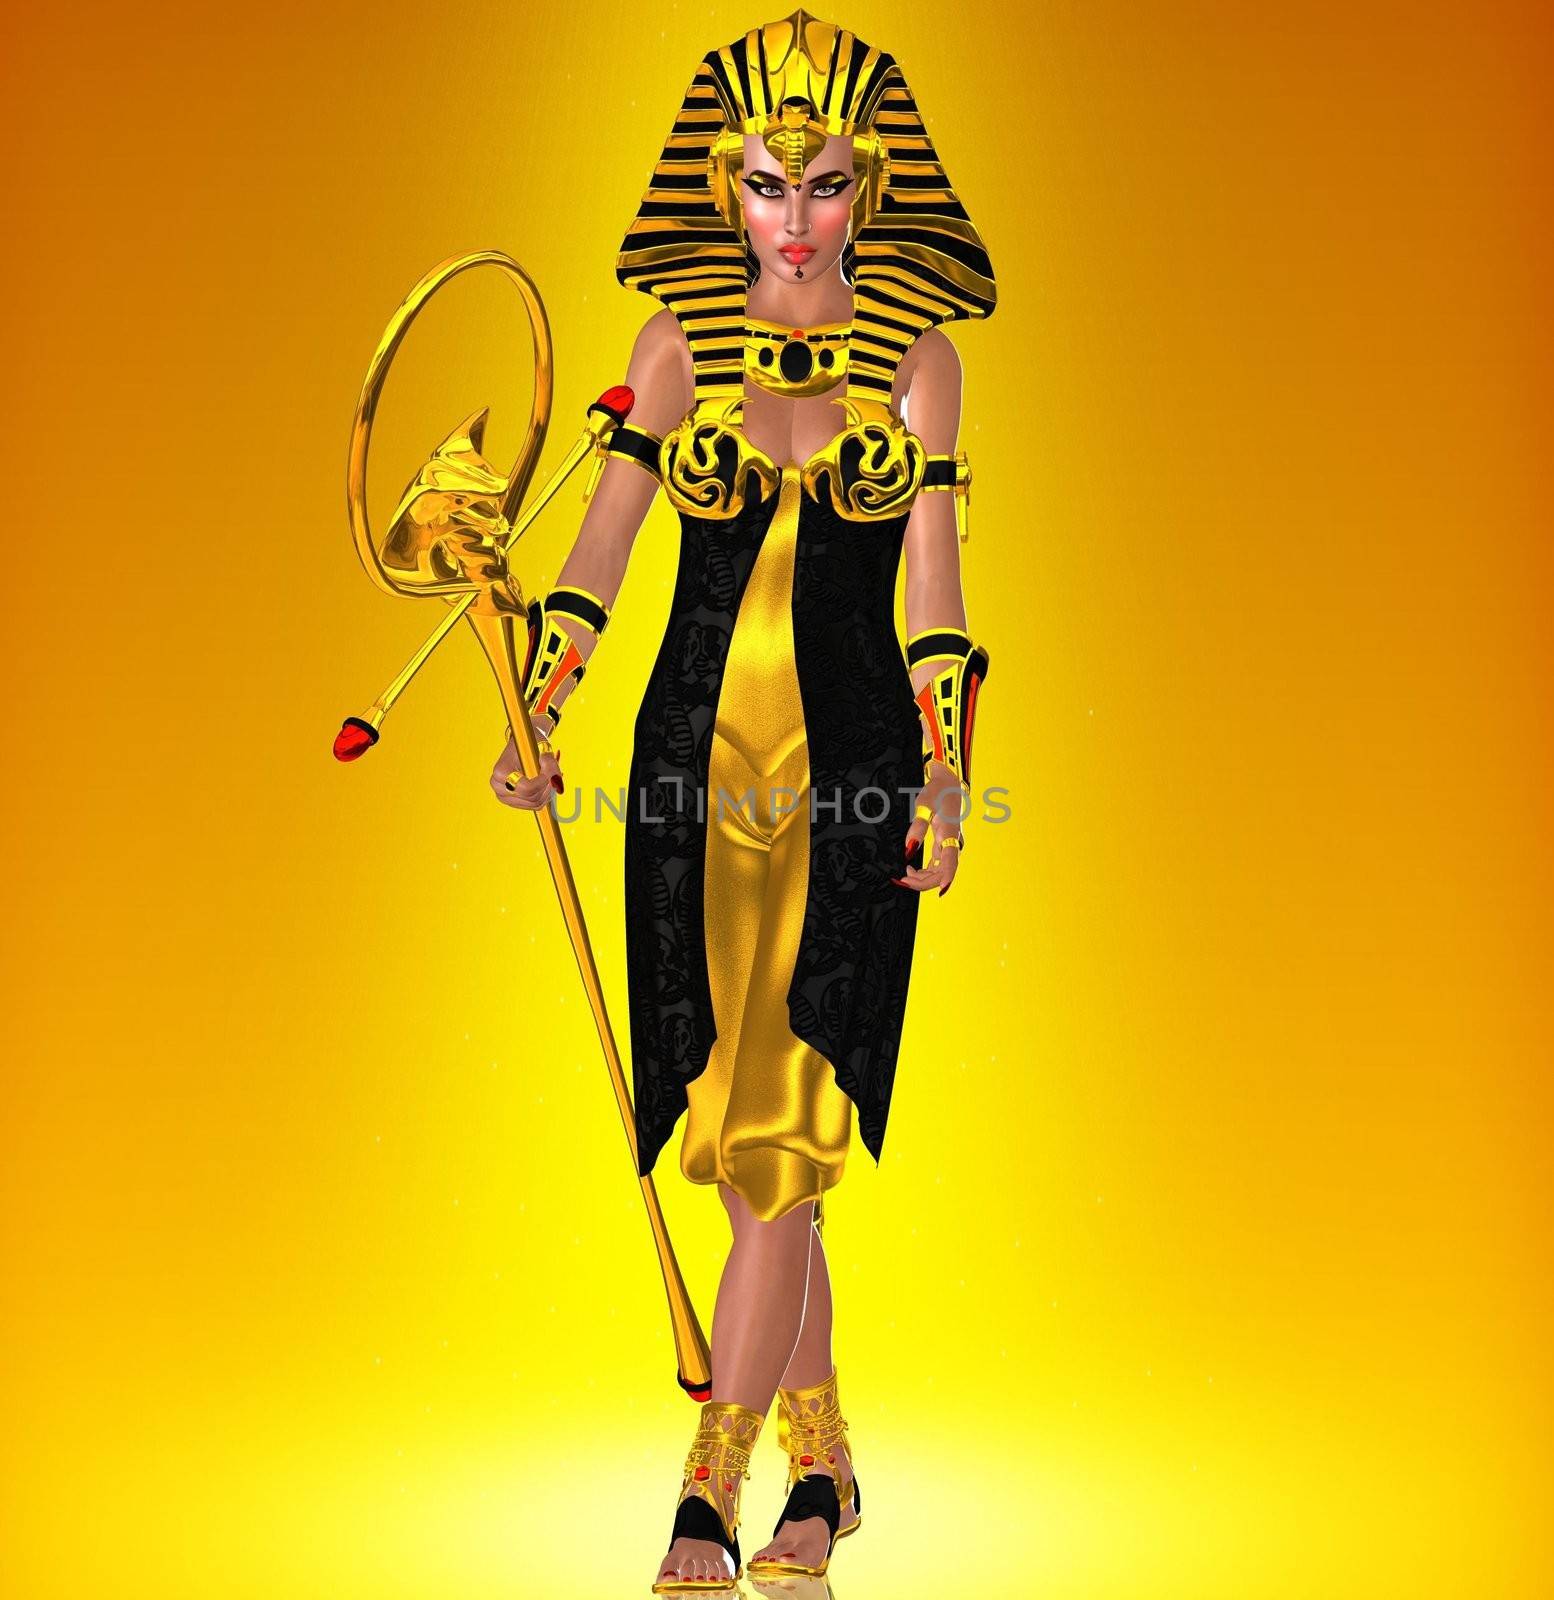 A powerful Egyptian woman who has anointed herself pharaoh, walks in a defiant manner, dressed in black and gold. Set on a gold abstract background to enhance the image of wealth.